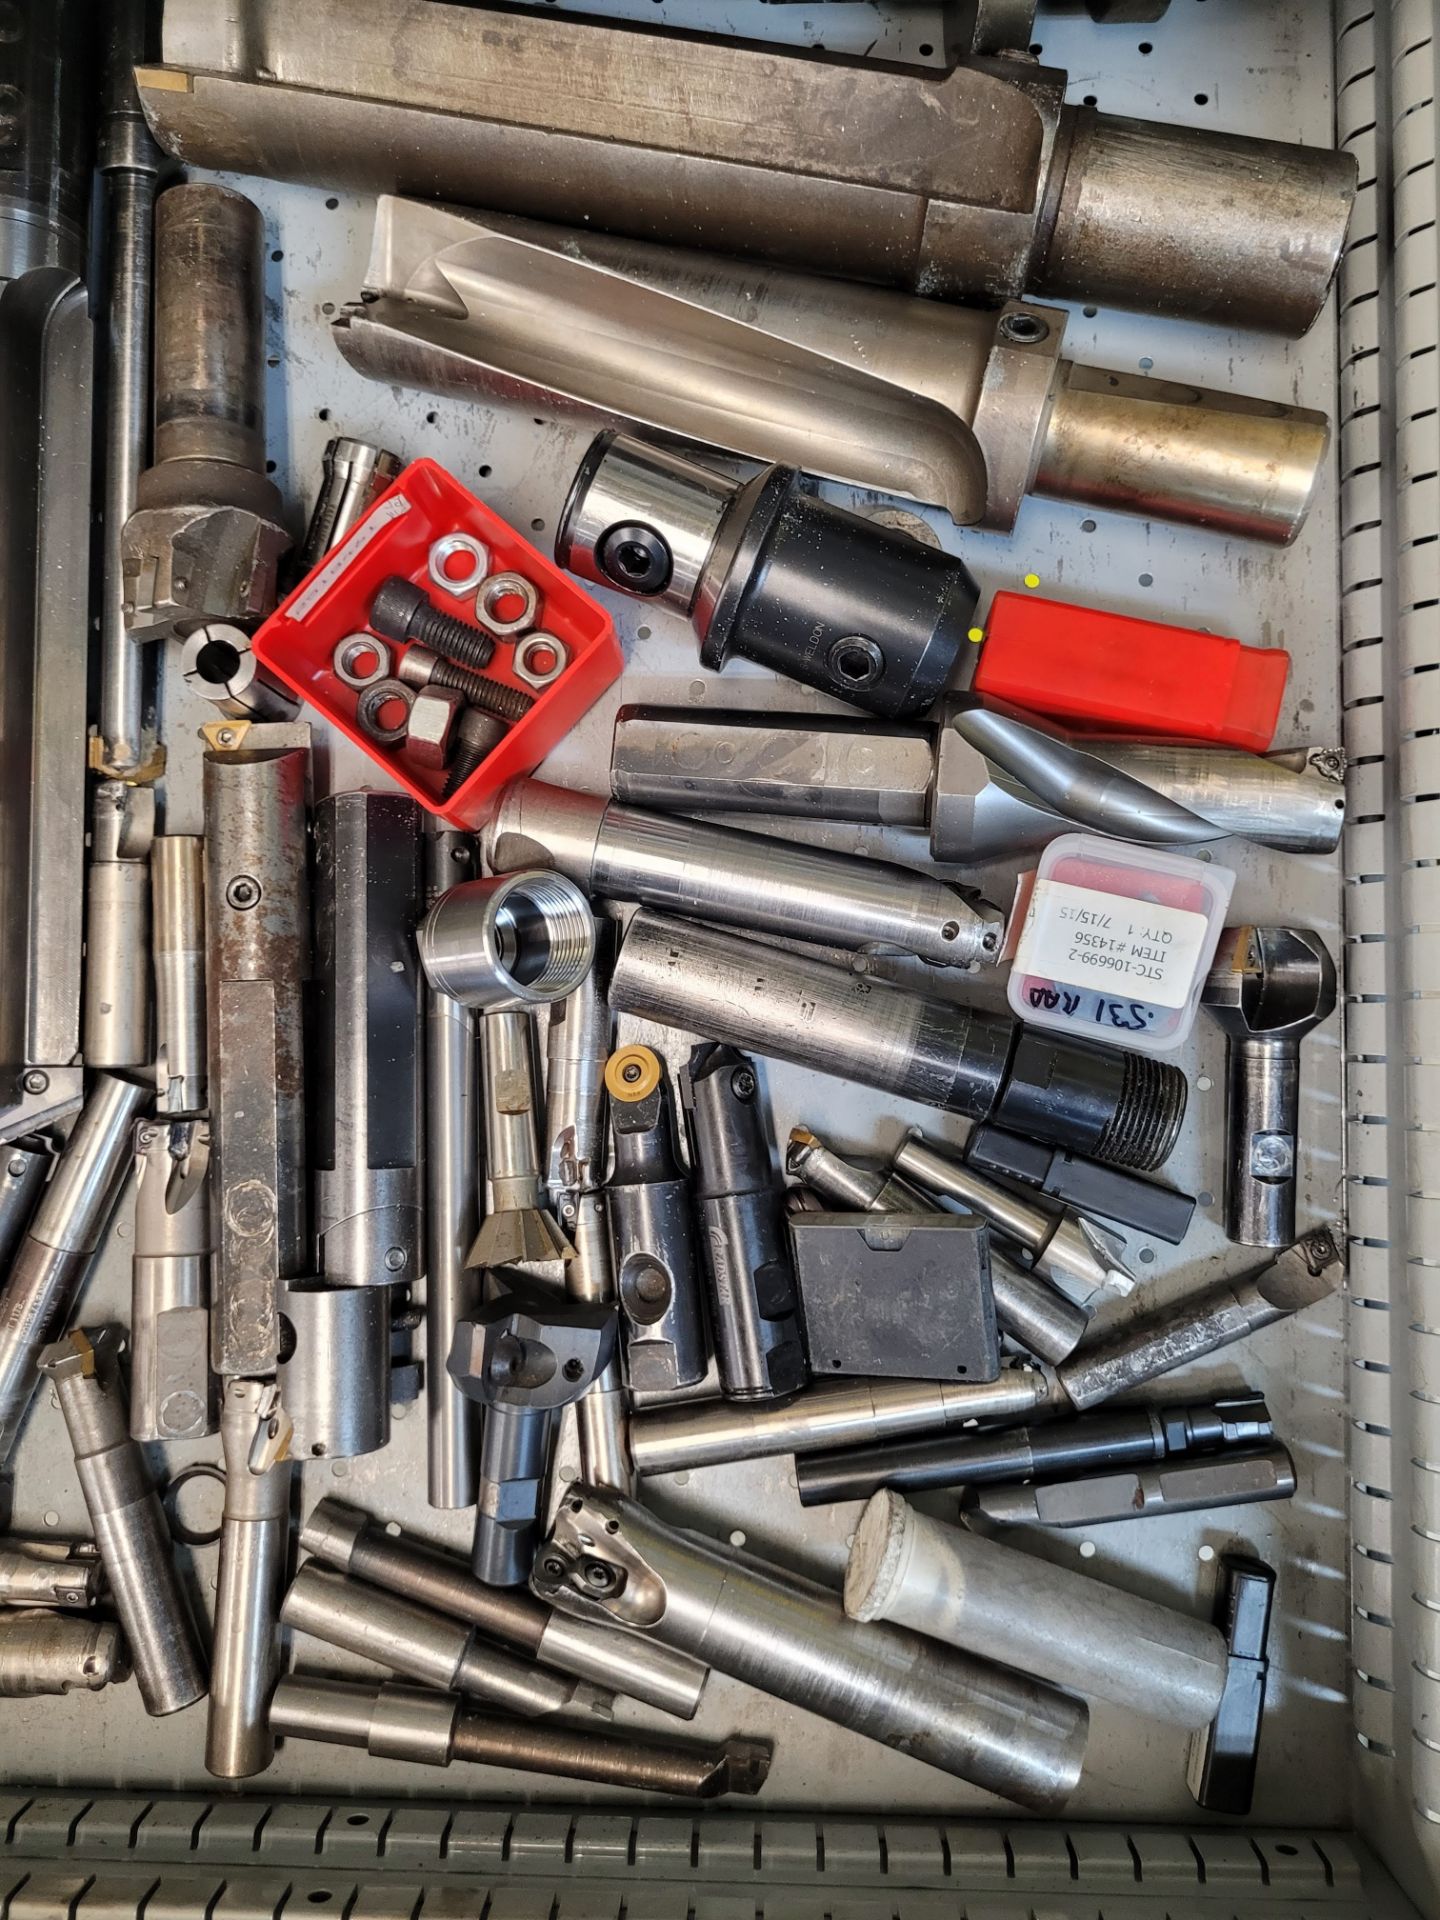 CONTENTS OF (1) TOOL CABINET DRAWER INCLUDING CARBIDE INSERTS, INSERT CUTTING BARS, BORING BARS, - Image 3 of 3